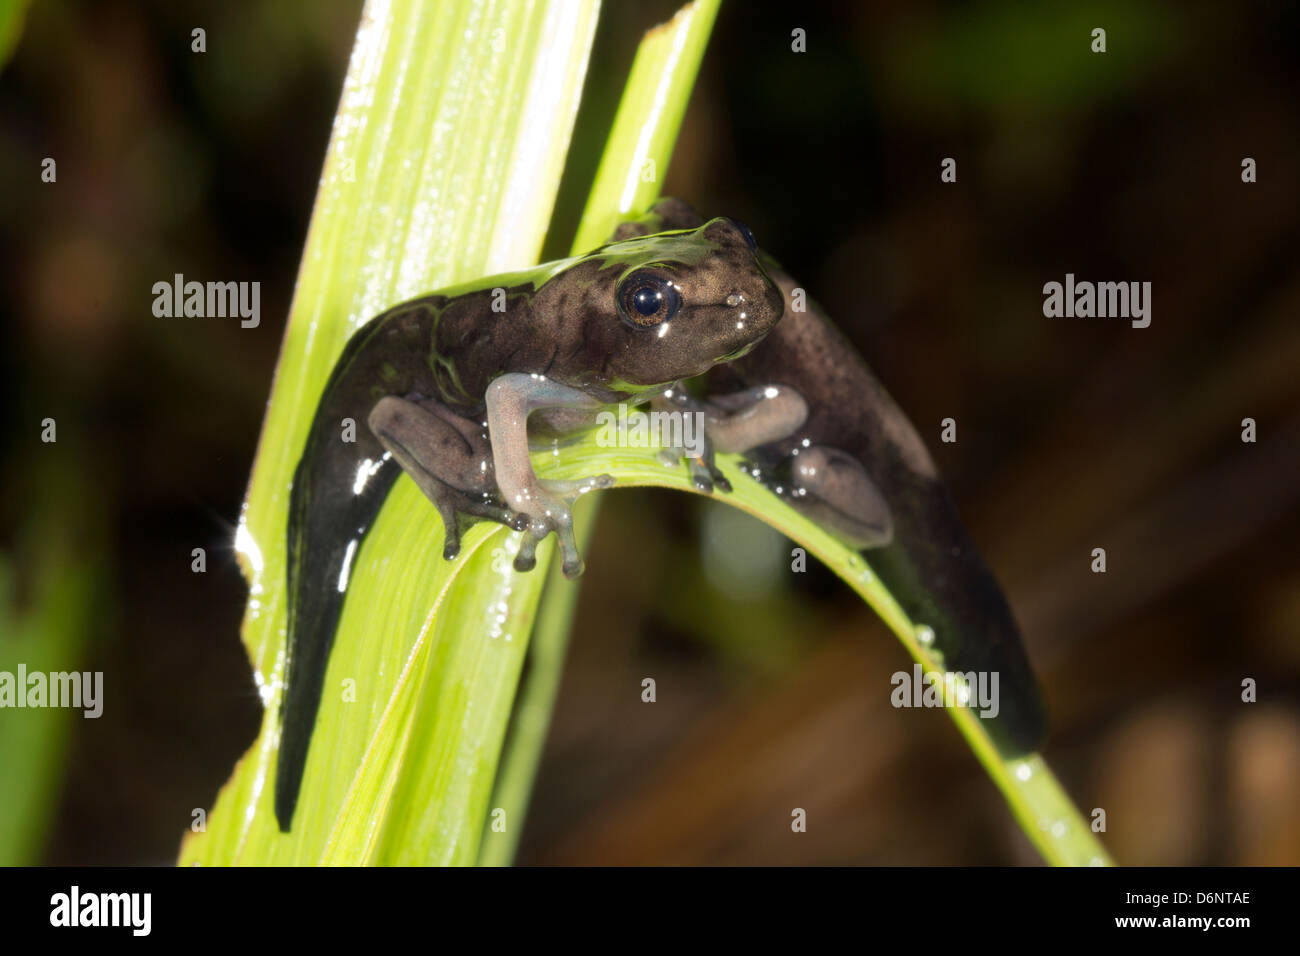 Amphibian metamorphosis - Tadpole of Hypsiboas geographicus changing into a frog above a rainforest pool in Ecuador Stock Photo